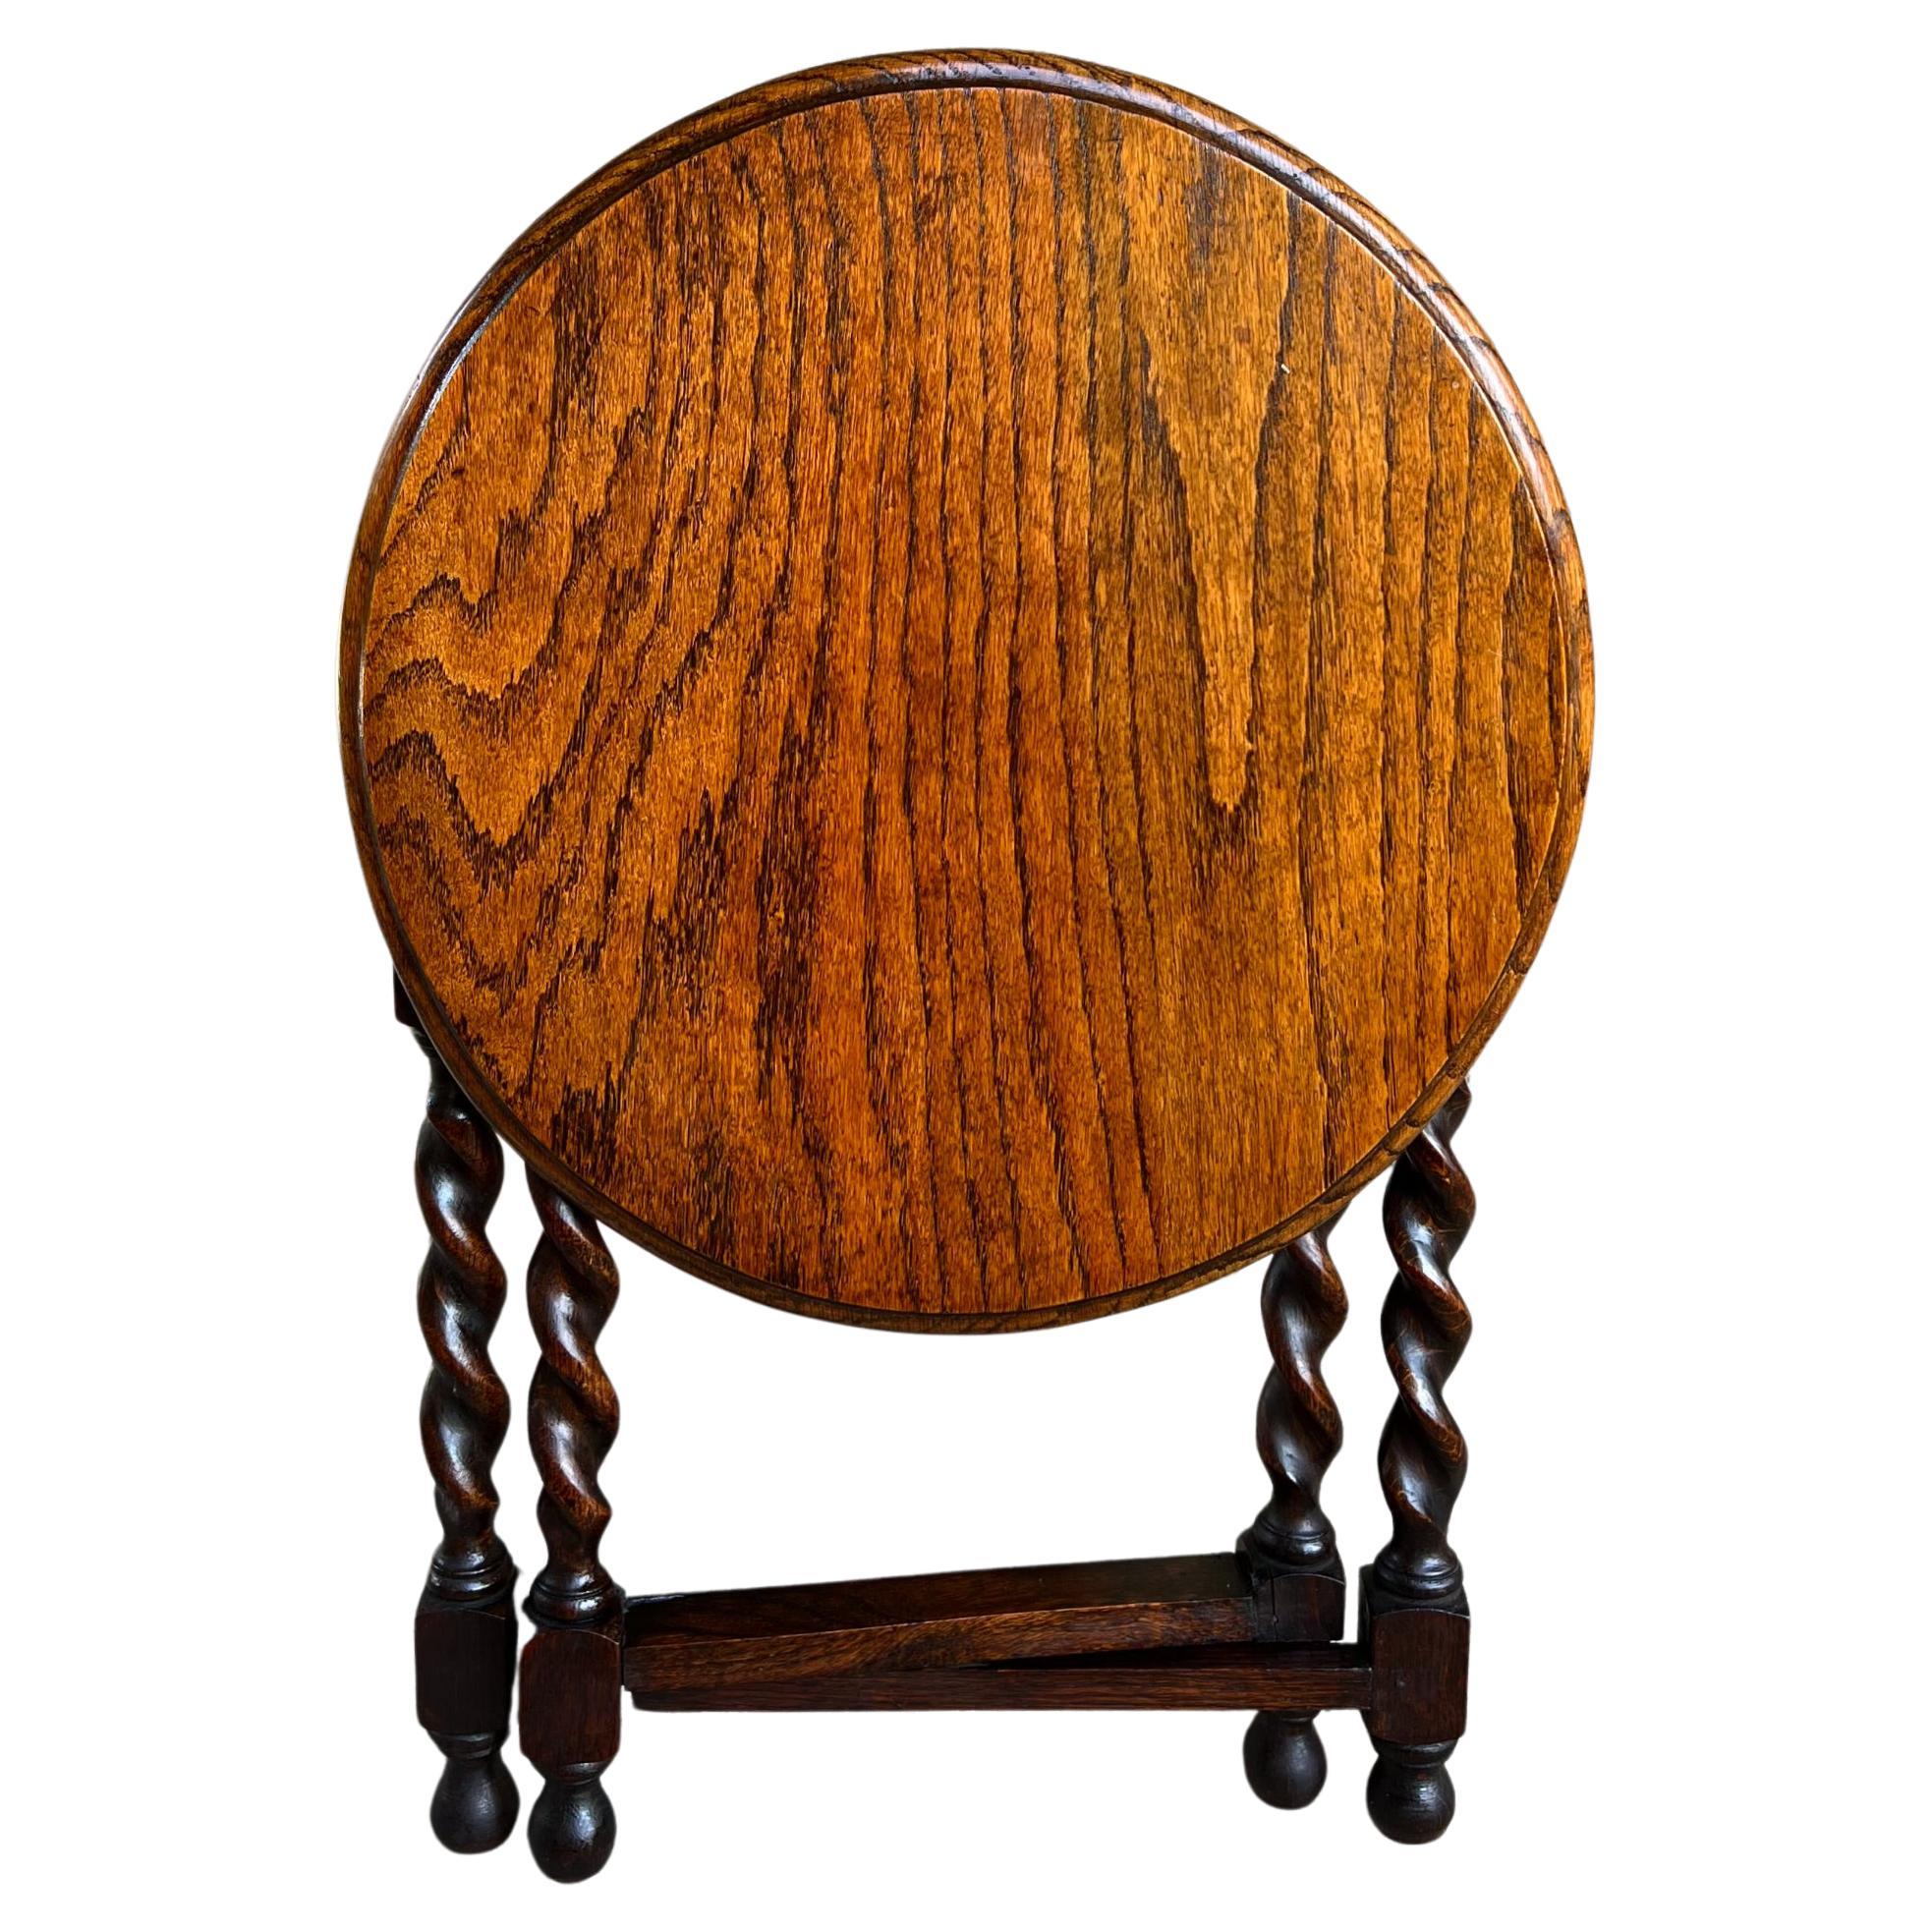 Petite Antique English Tiger Oak Barley Twist round folding tea table gateleg.

Direct from England, a charming antique English oak folding “tea” table.
Features include a small tiger oak round top with beveled edge, and folding base with